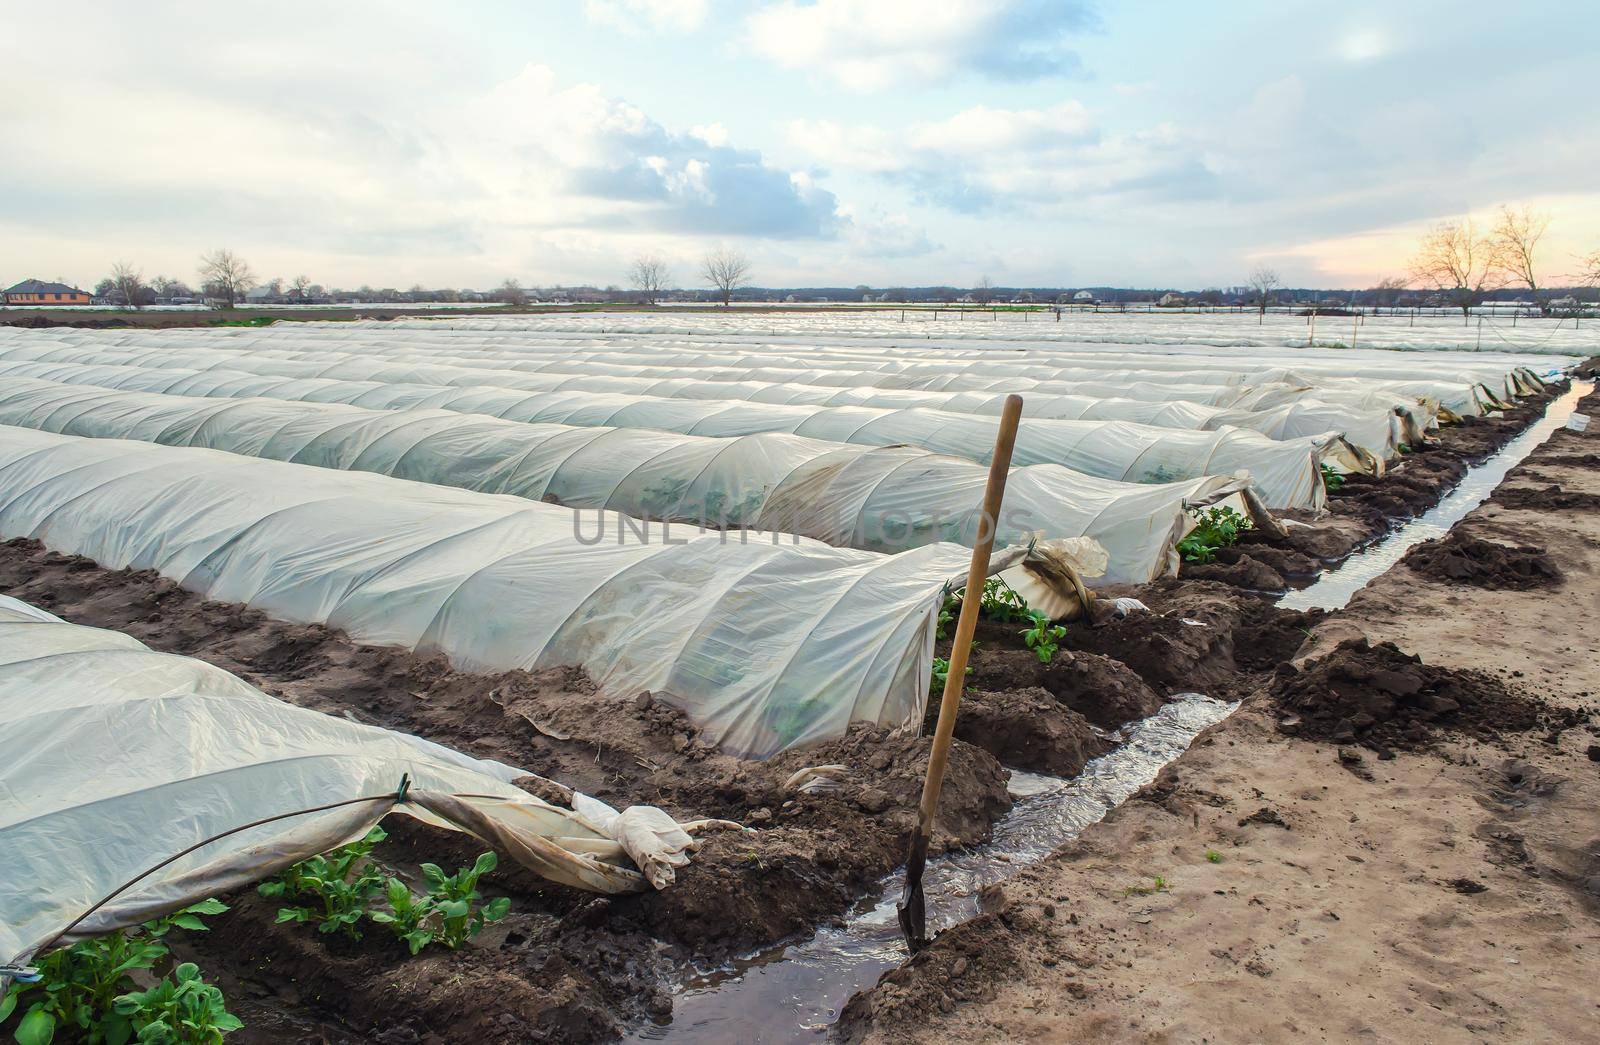 Open tunnel rows of potato bushes plantation and an irrigation canal filled with water. Agroindustry and agriculture. Growing early potatoes under protective plastic cover. Greenhouse effect. by iLixe48